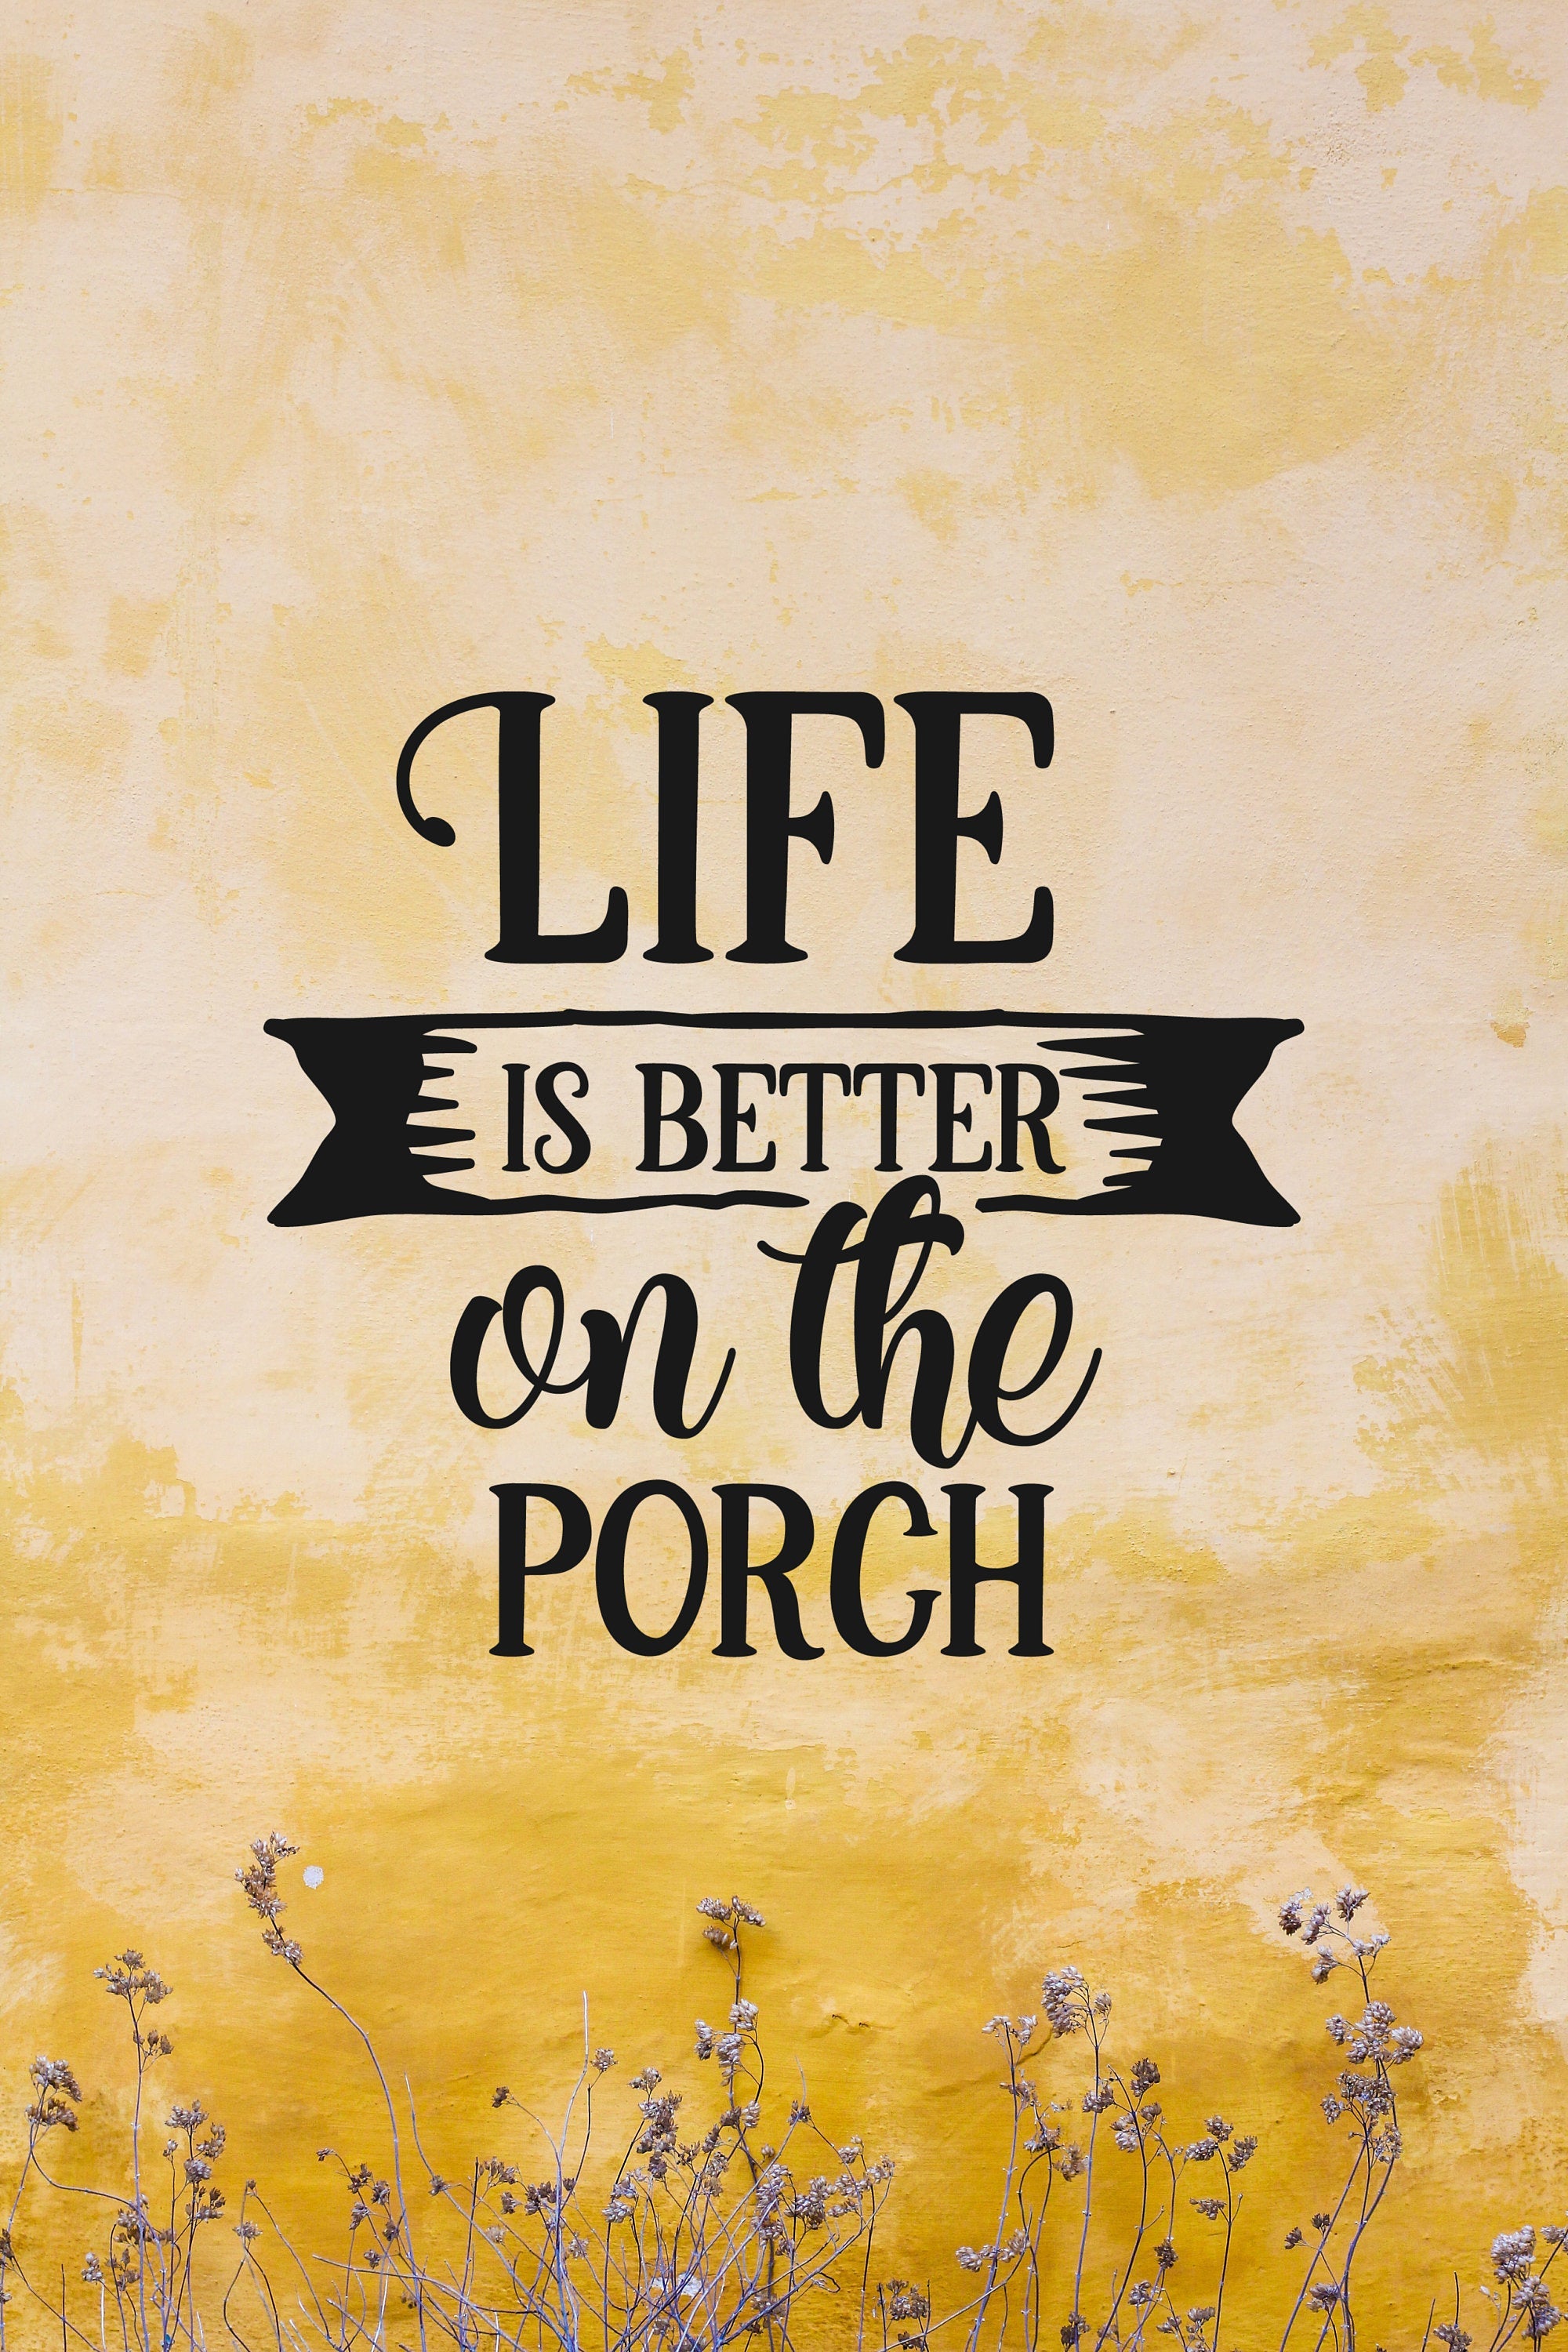 Life is Better on the Porch Sign - Permanent Outdoor-Grade Vinyl Decal for Signs, Weatherproof and Water-proof